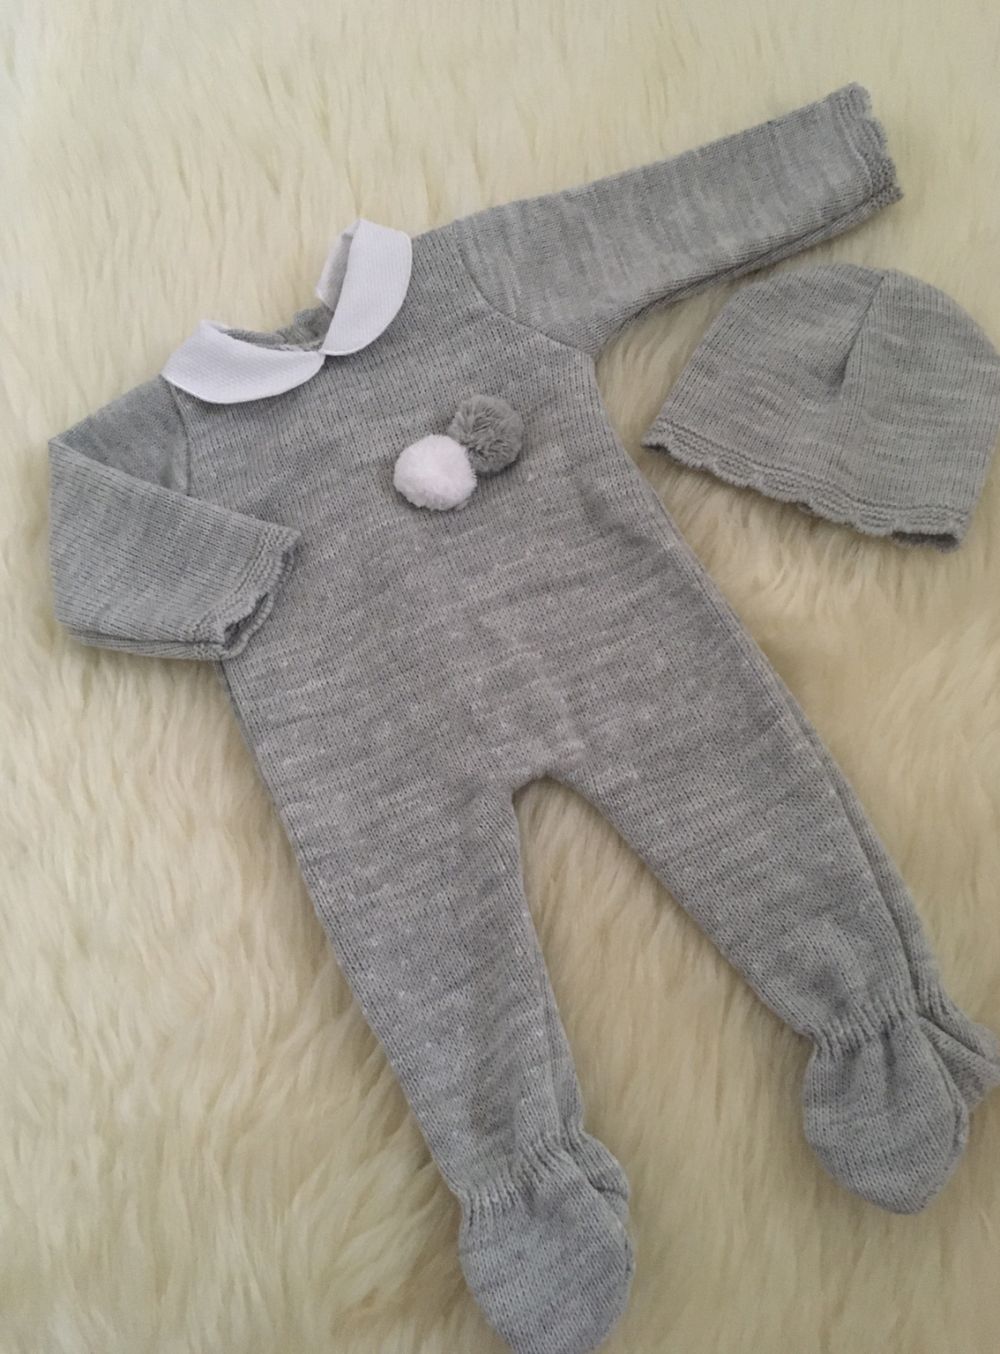 babies unisex knitted all in one romper grey pom poms matching hat 